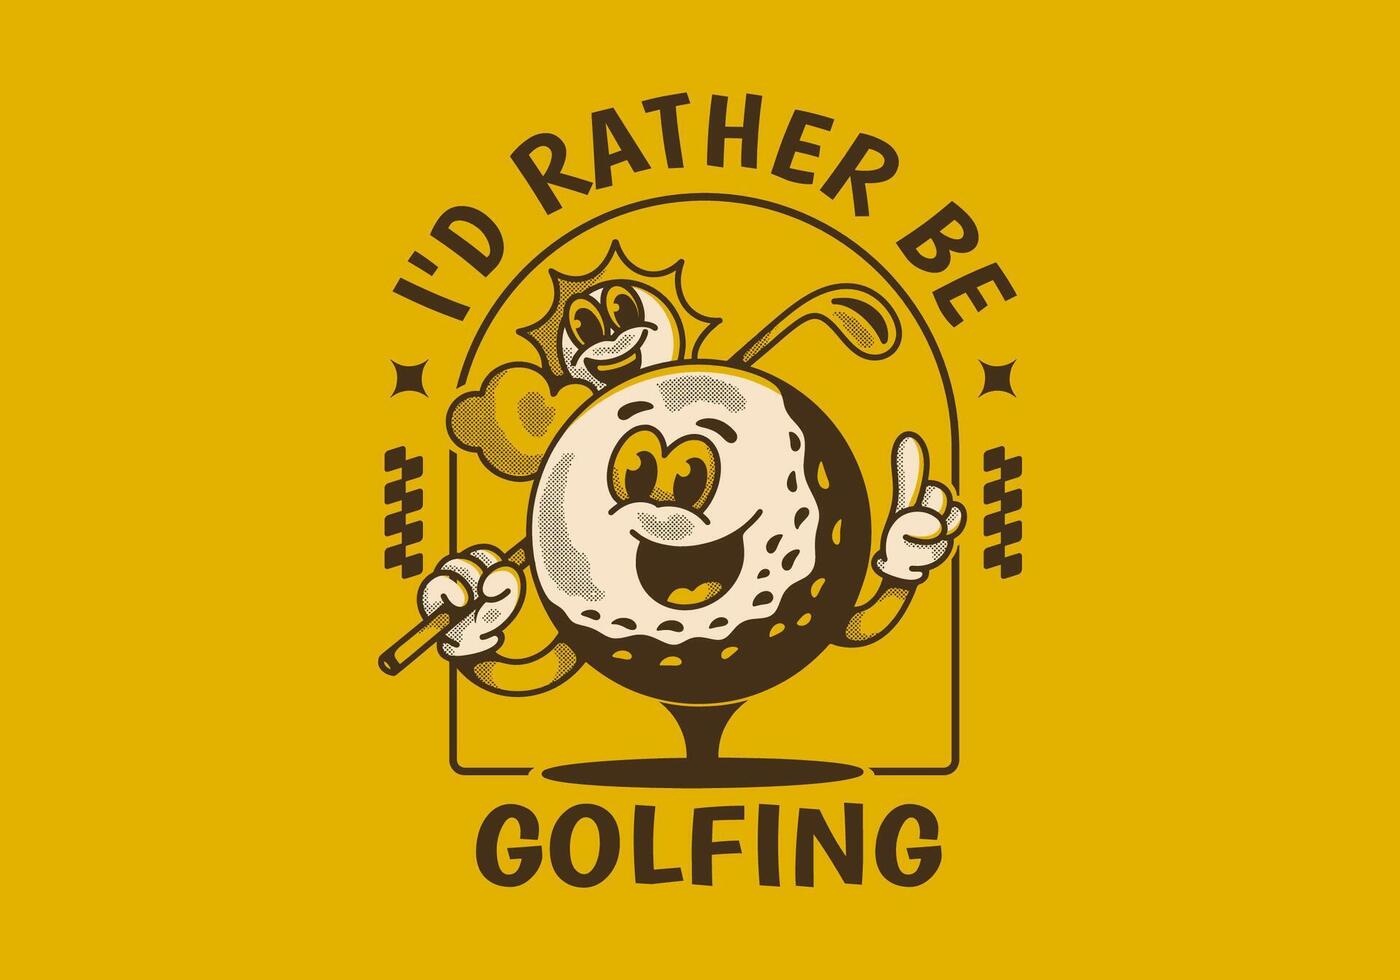 I'd rather be golfing. Vintage character illustration of a golf ball holding a golf stick vector